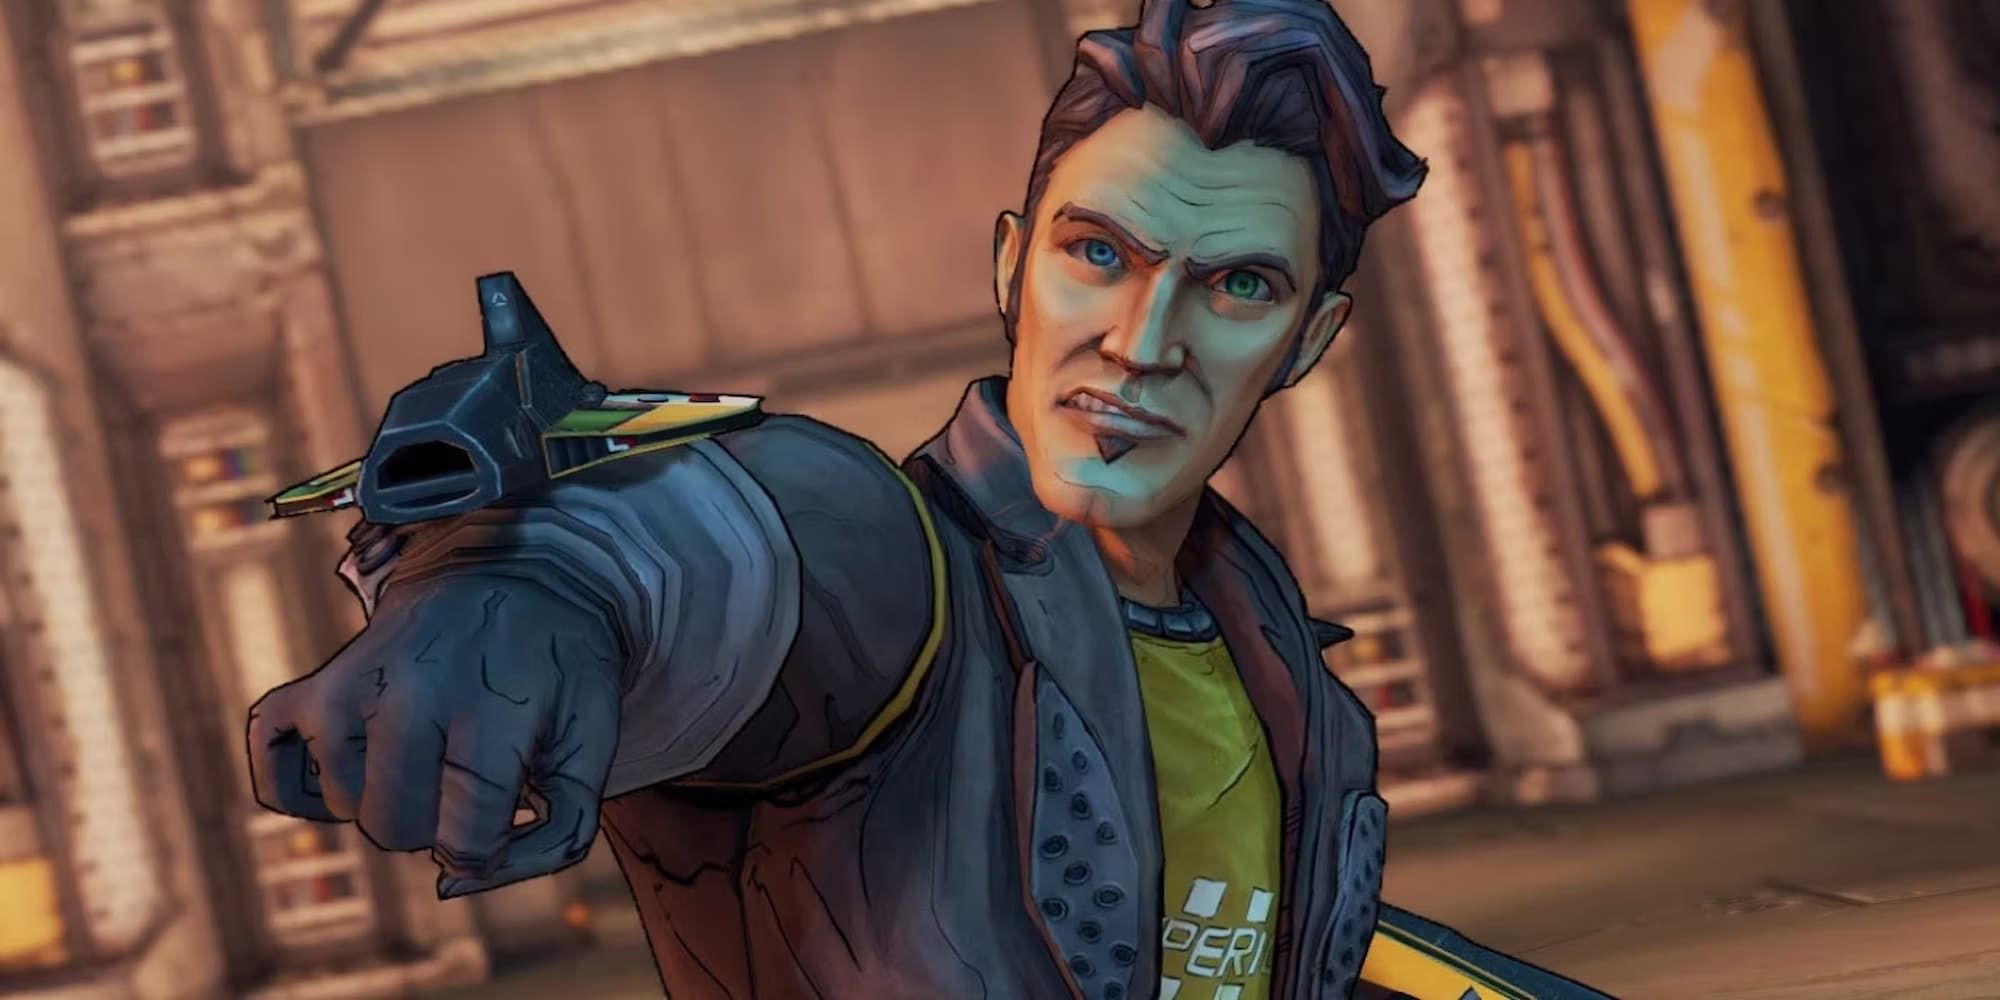 Handsome Jack points a wrist-mounted weapon forward.